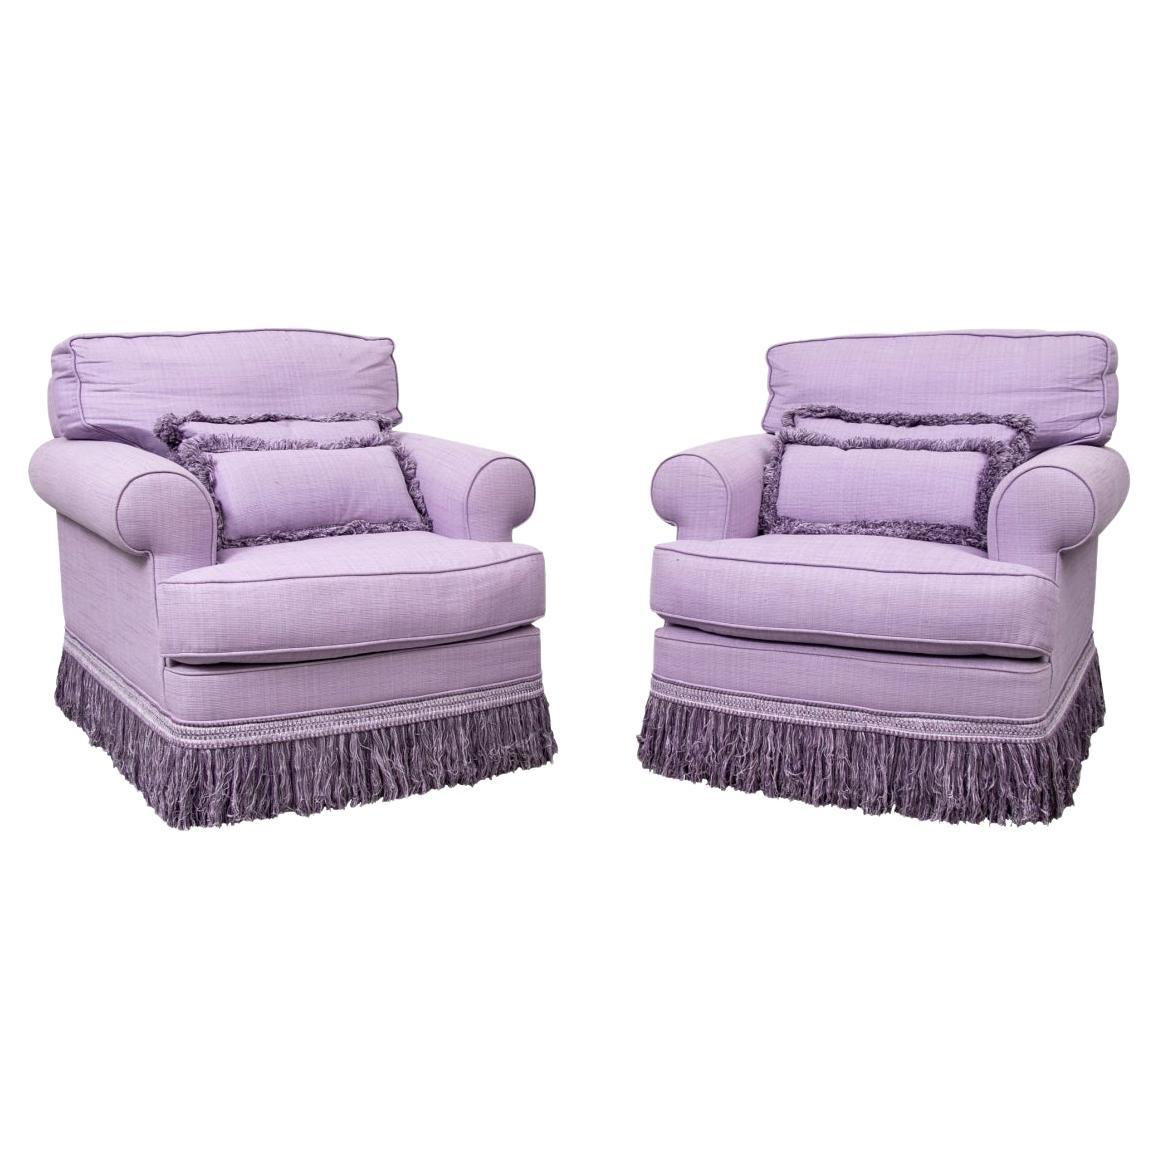 Pair Contemporary Swivel Club Chairs in a Violet Upholstery For Sale